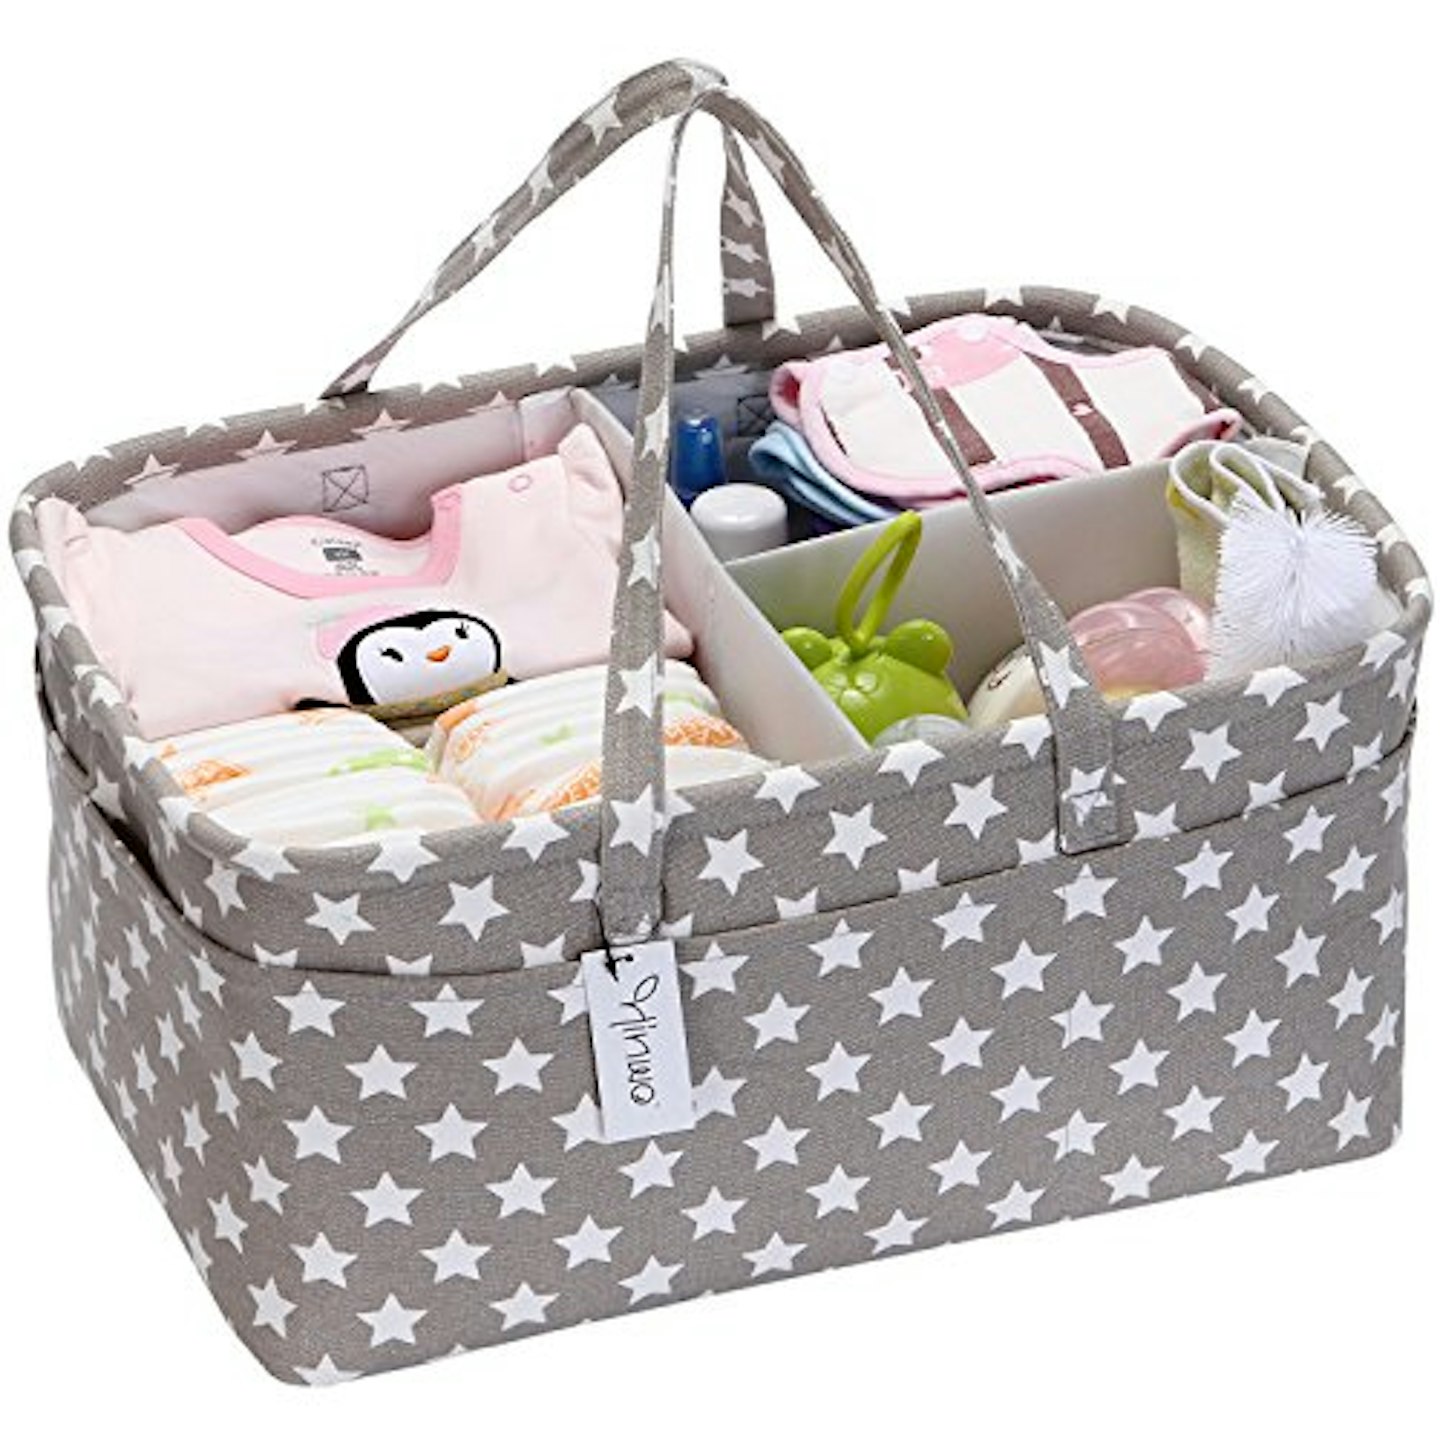 Hinwo Baby Diaper Caddy - nappy organisers